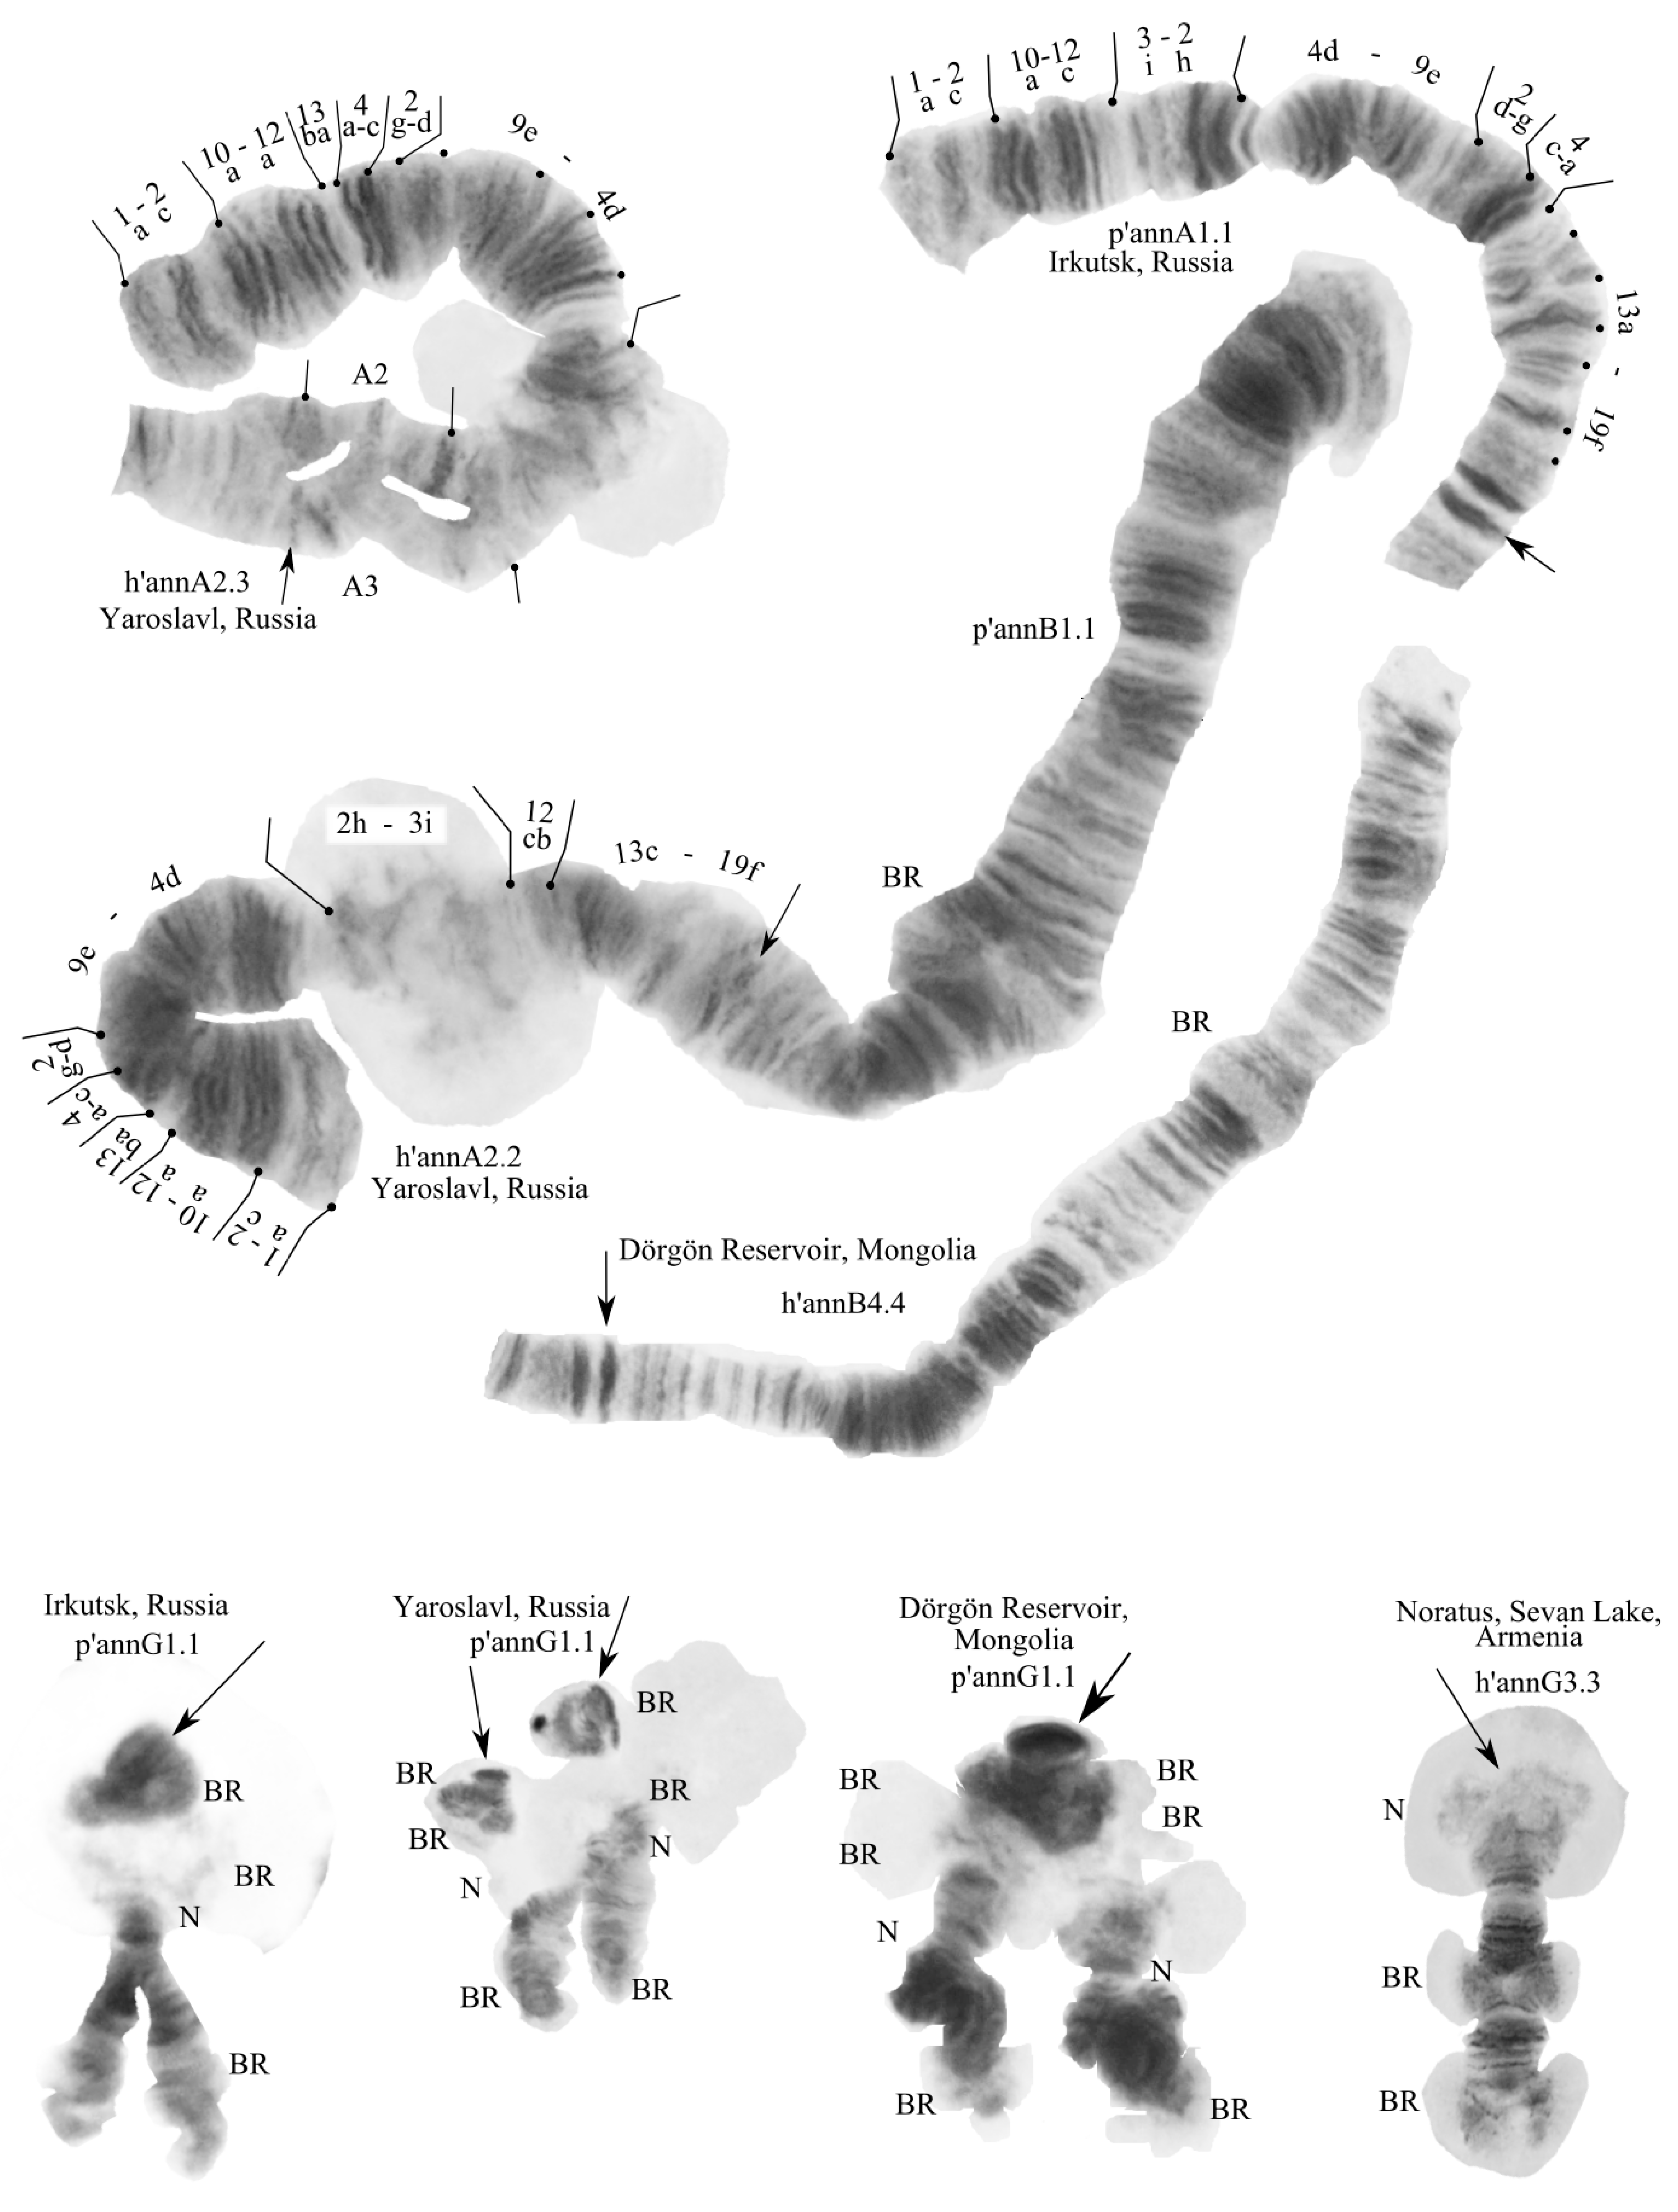 Balbiani rings are the structural feature of(A) Lampbrush chromosomes(B)  Polytene chromosomes(C) - Brainly.in